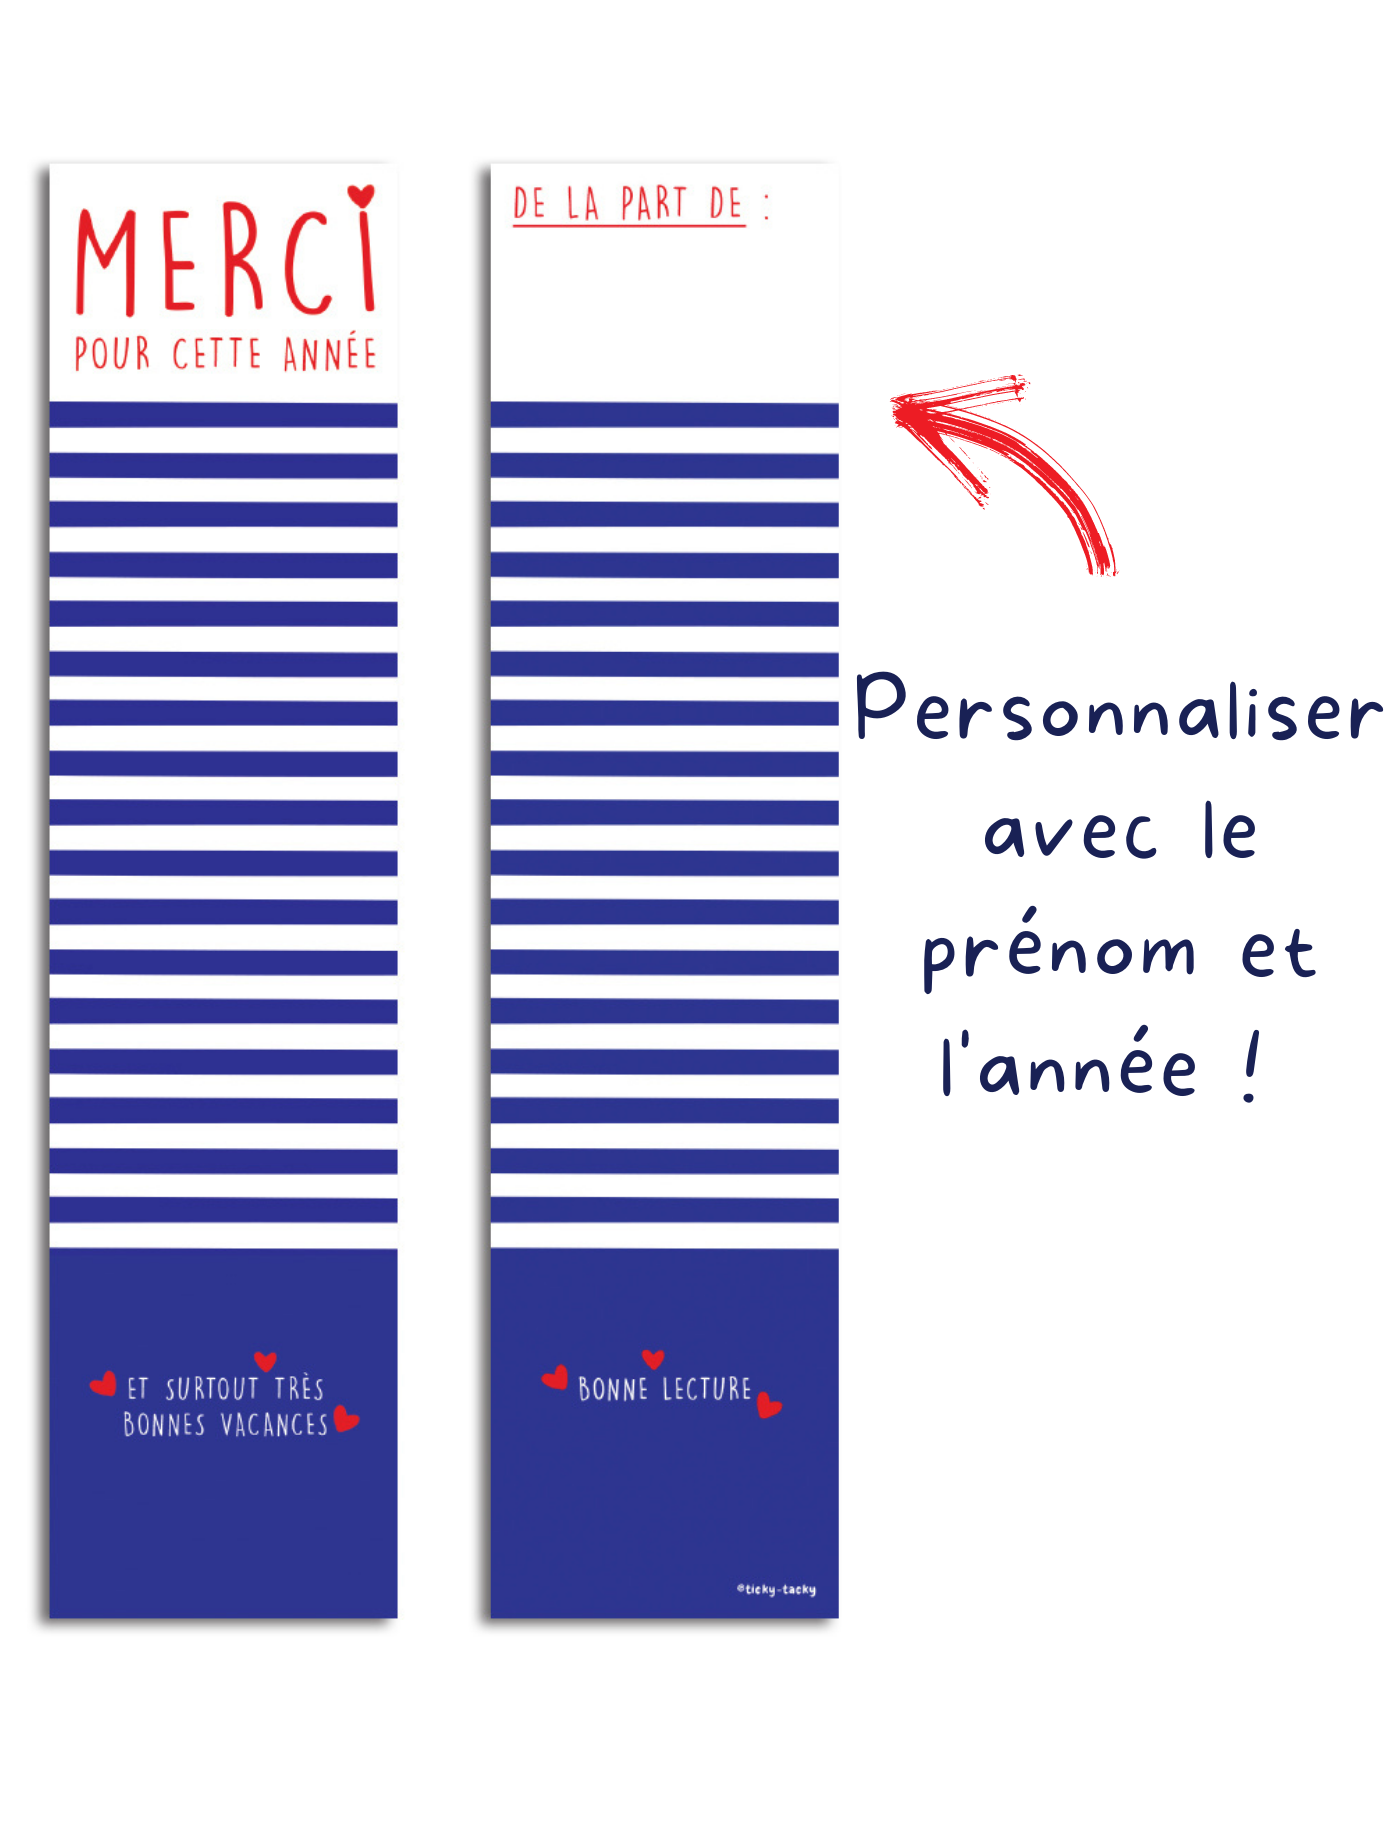 02 - Merci-Fin-Annee-marque-pages-a-personnaliser